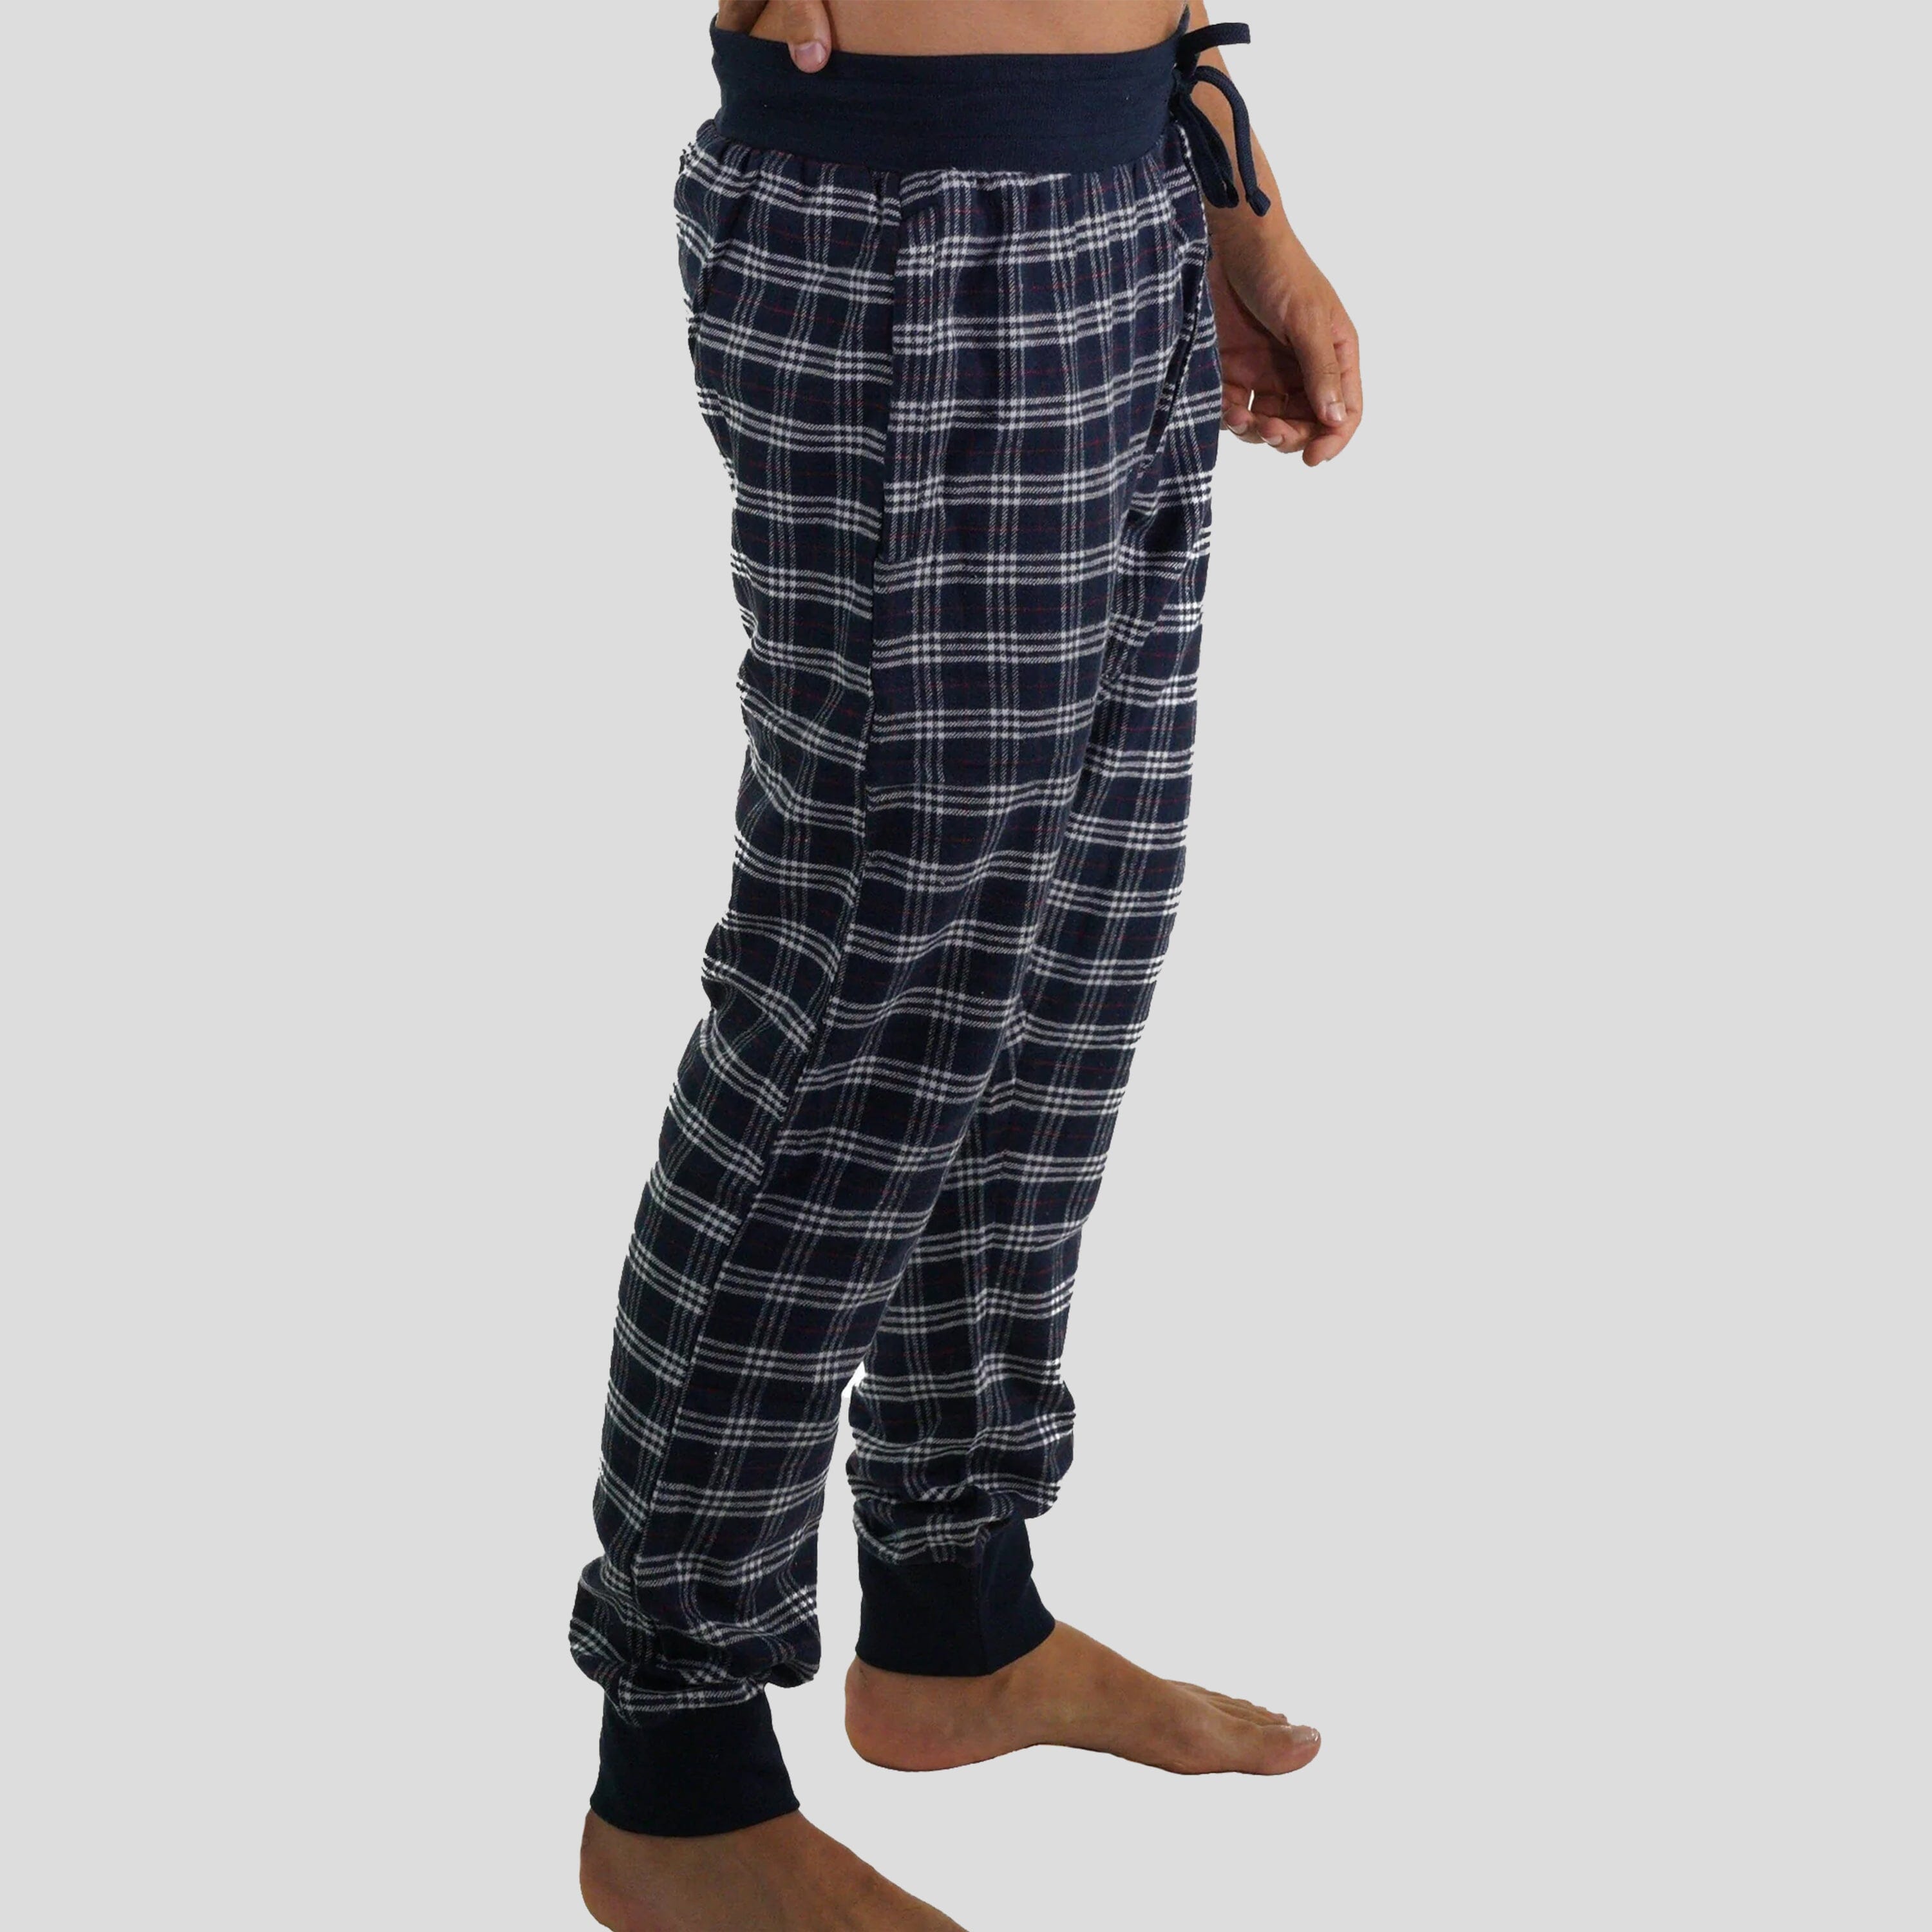 Men's Flannel Jogger Lounge Pants - GREY/RED Men's Sleep Pant Members Only 